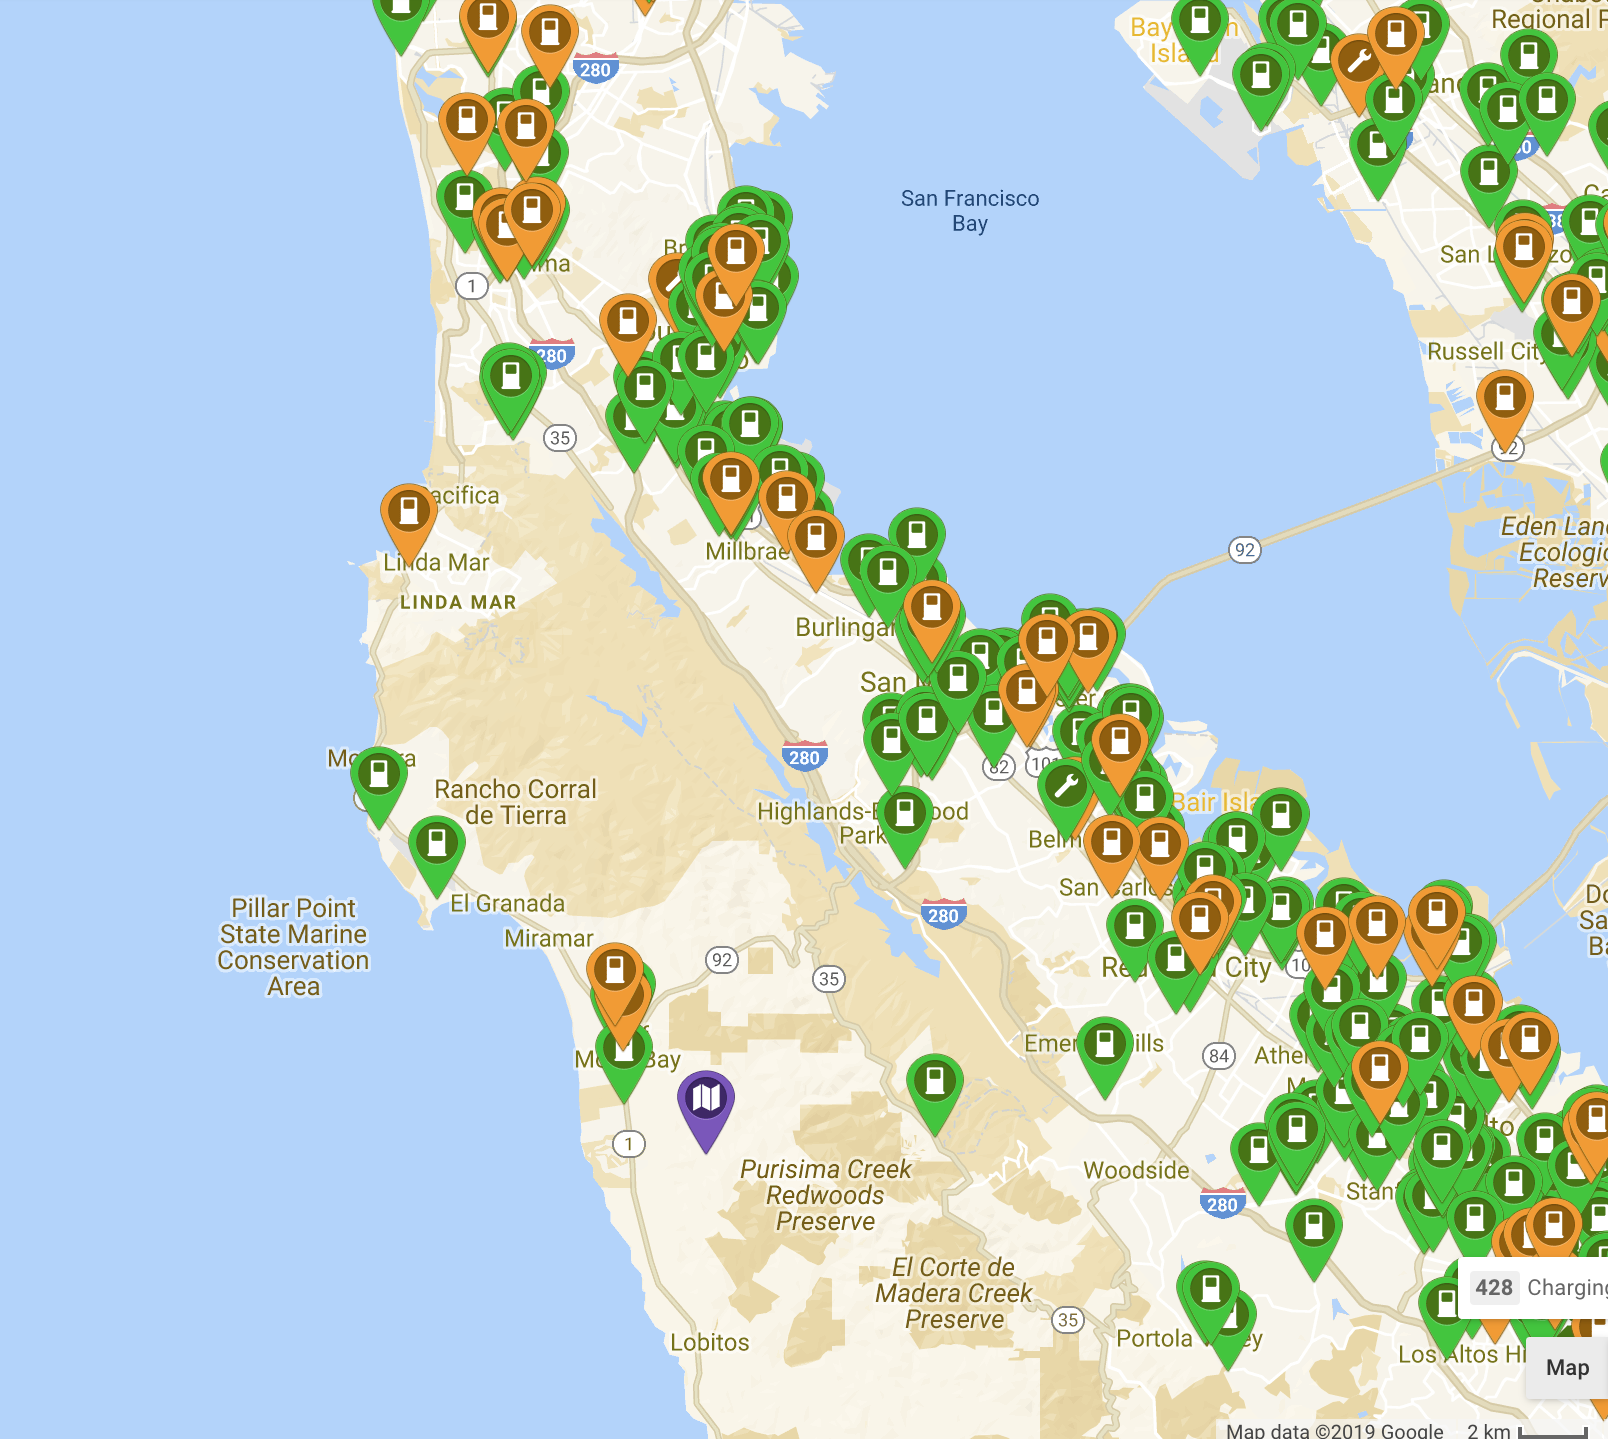 24-million-for-ev-charging-stations-in-san-mateo-county-renewables